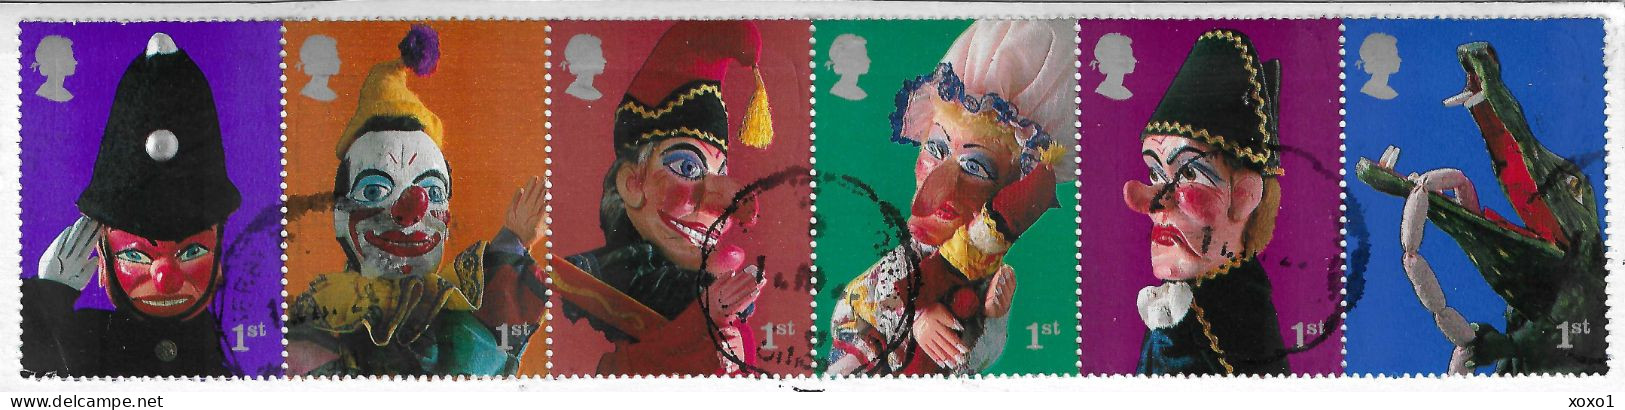 Great Britain 2001 MiNr. 1946 - 1951 Großbritannien Hand Puppet Theater: Punch And Judy Childhood Dolls 6v Used 7.50 € - Muñecas